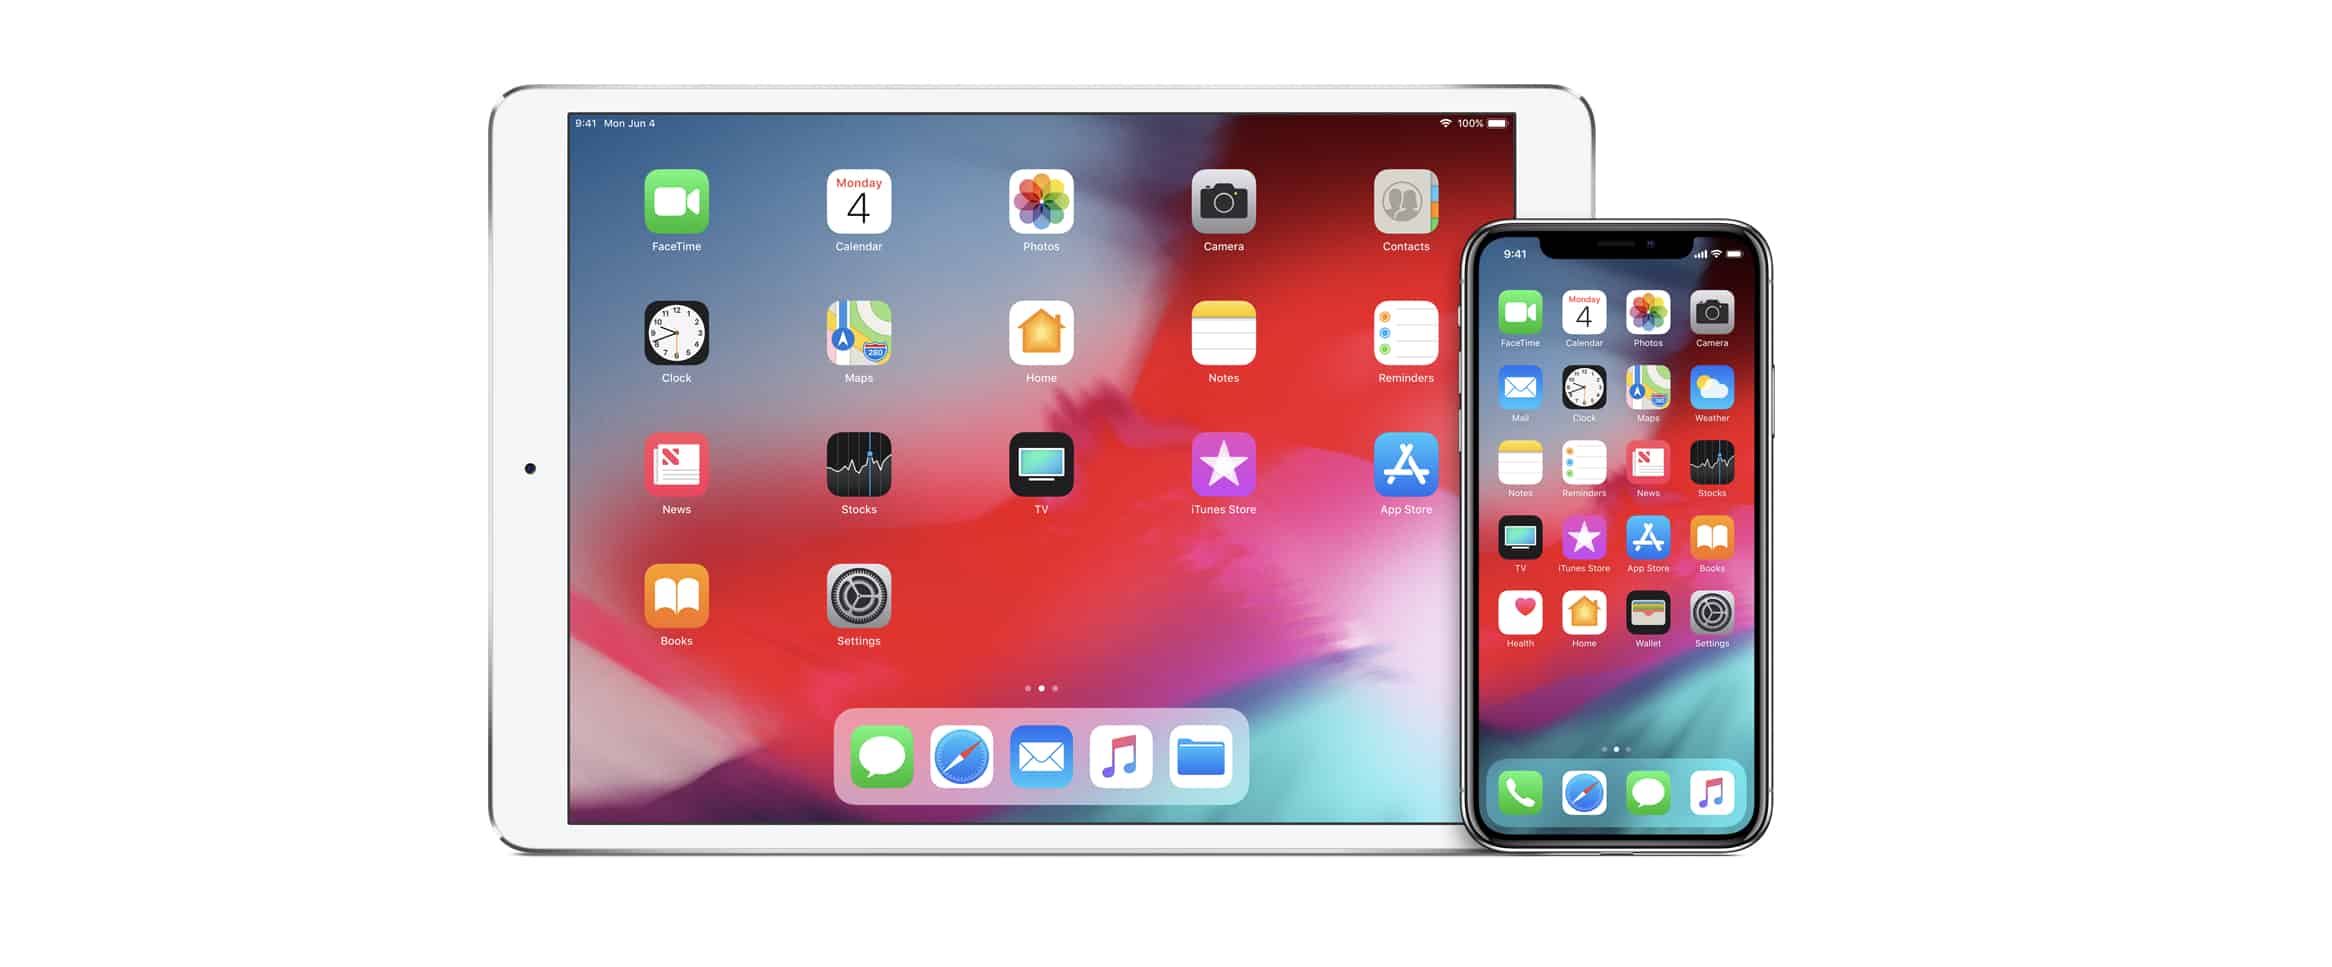 iOS 12.1 could be out for iPhone and iPad by the end of this month.